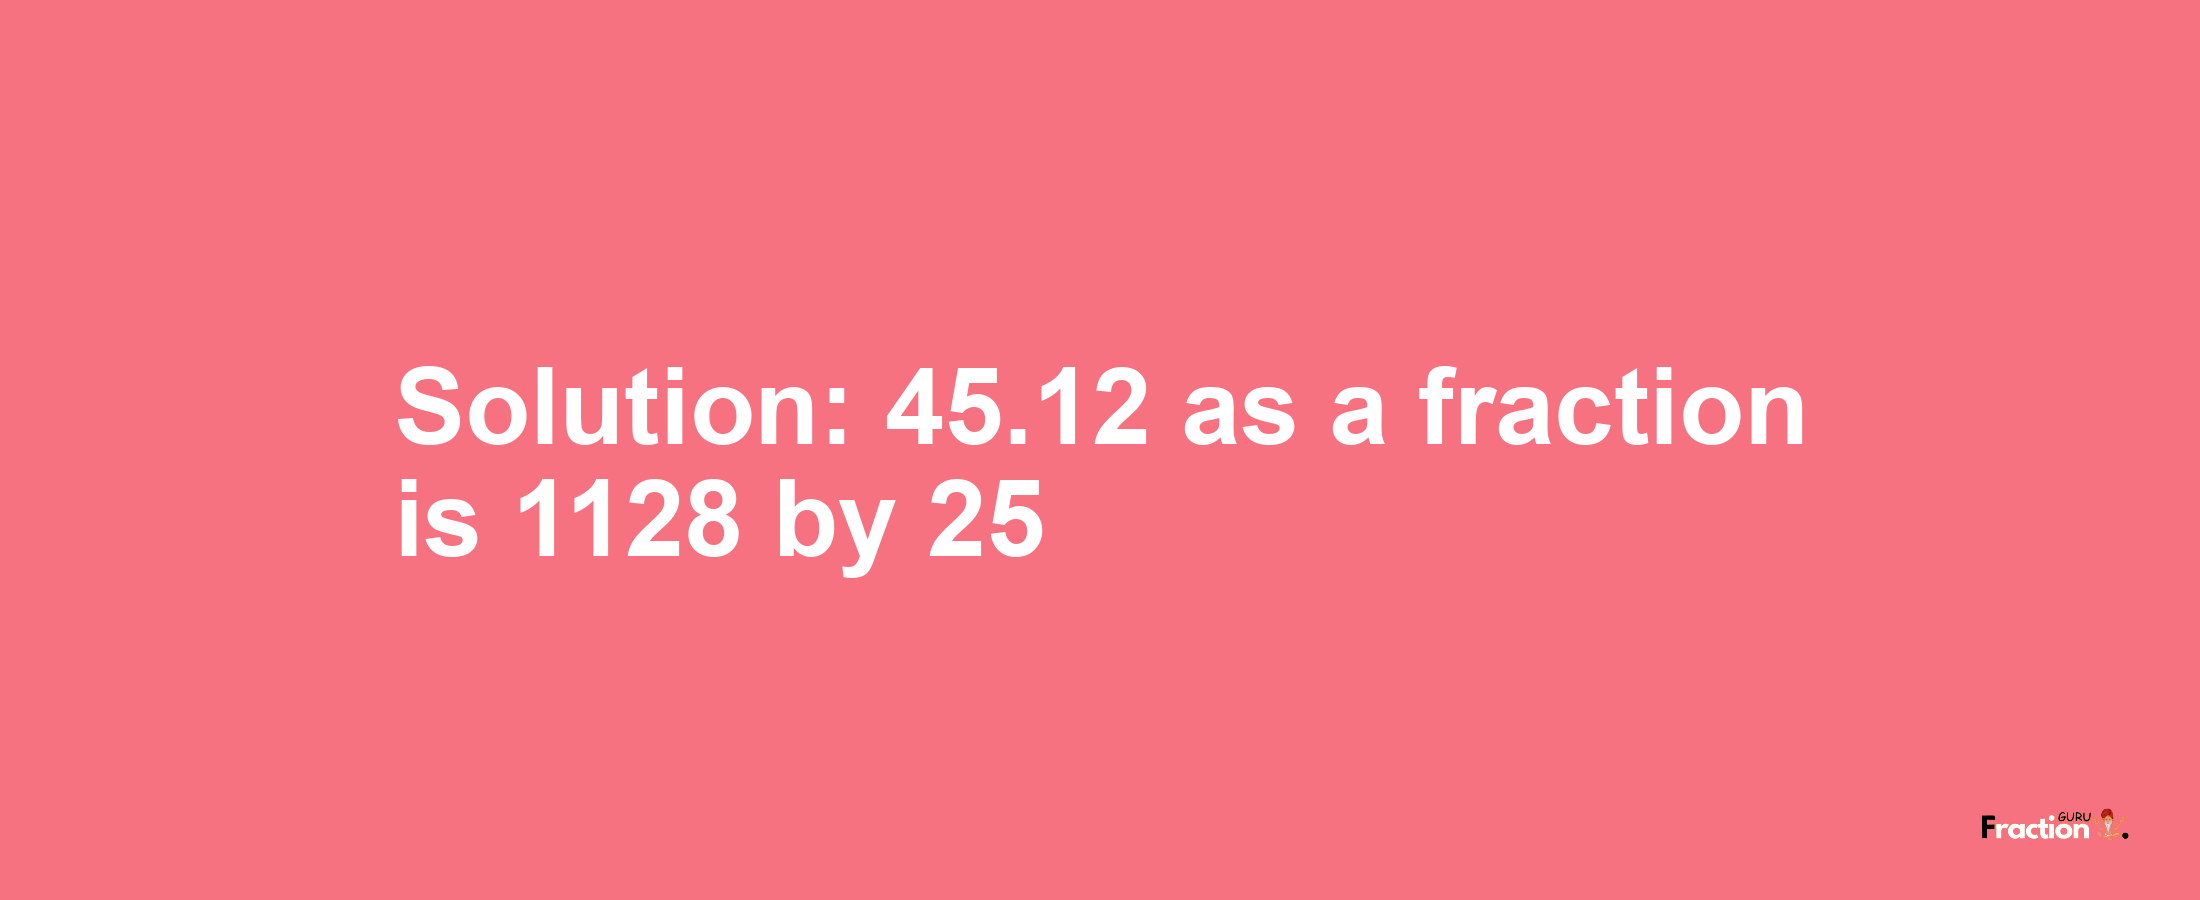 Solution:45.12 as a fraction is 1128/25